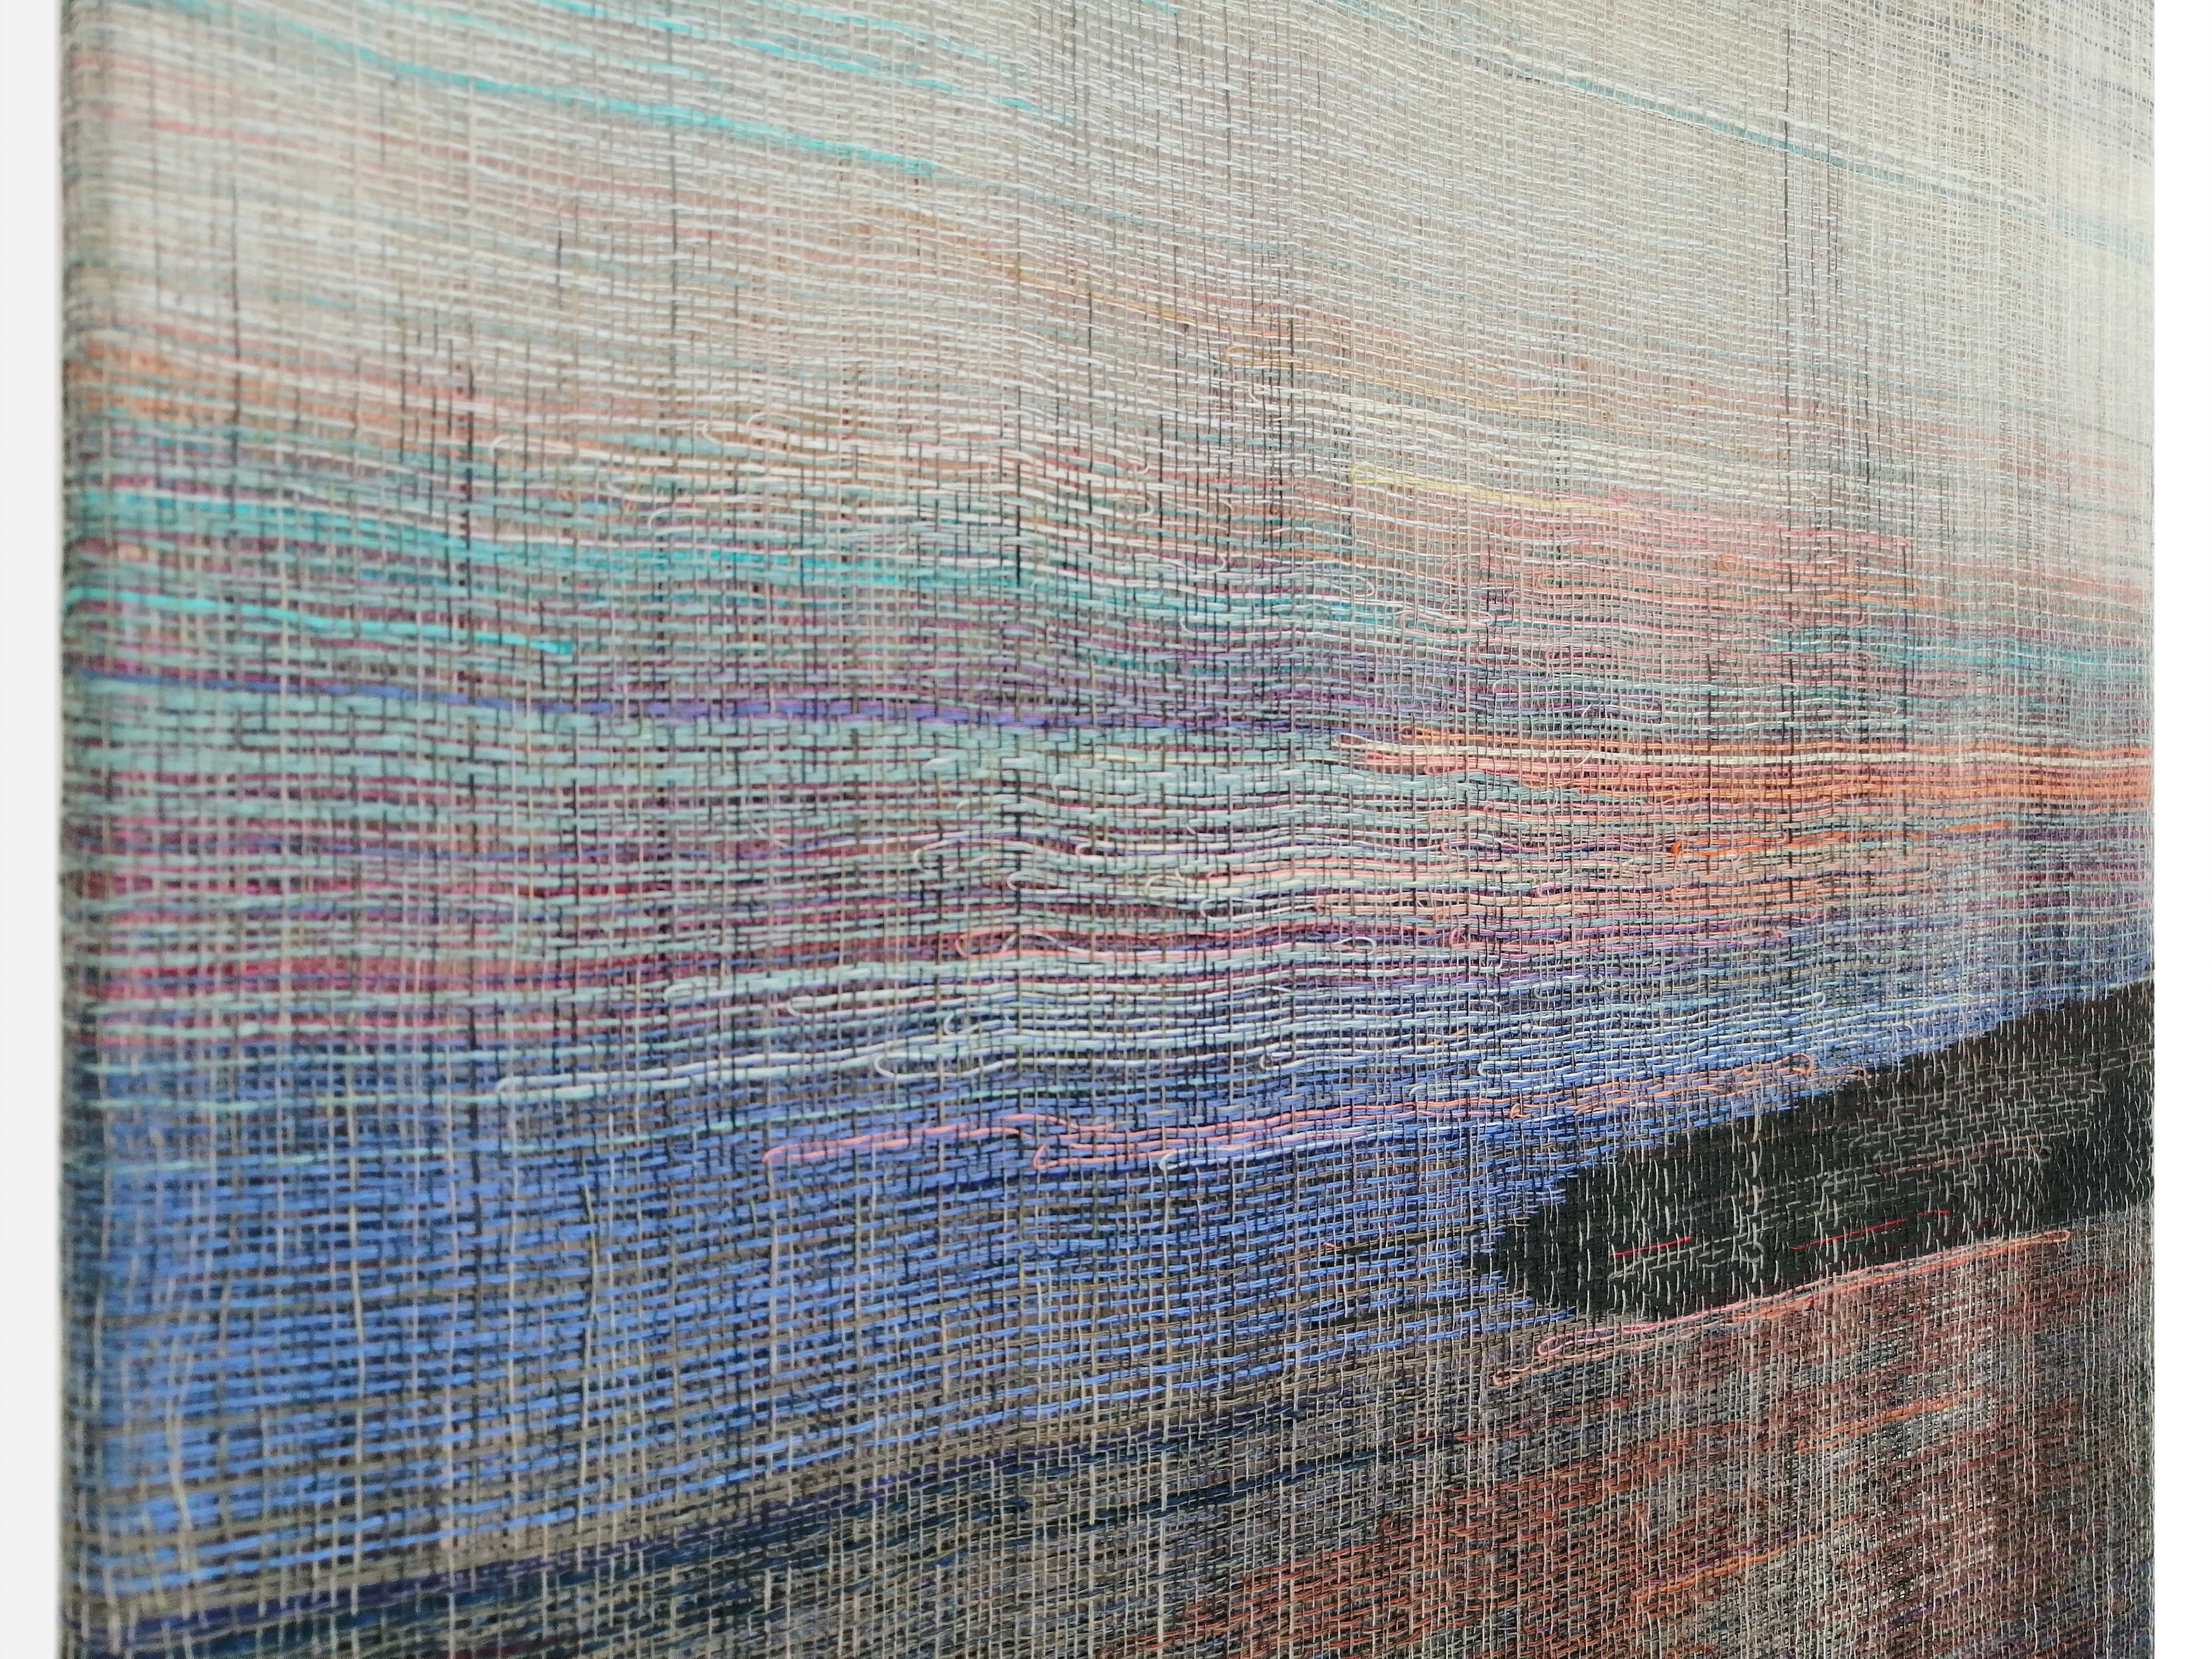 Wolin - Abstract Landscape, Contemporary Woven and Painted Artwork - Painting by Marta Pokojowczyk